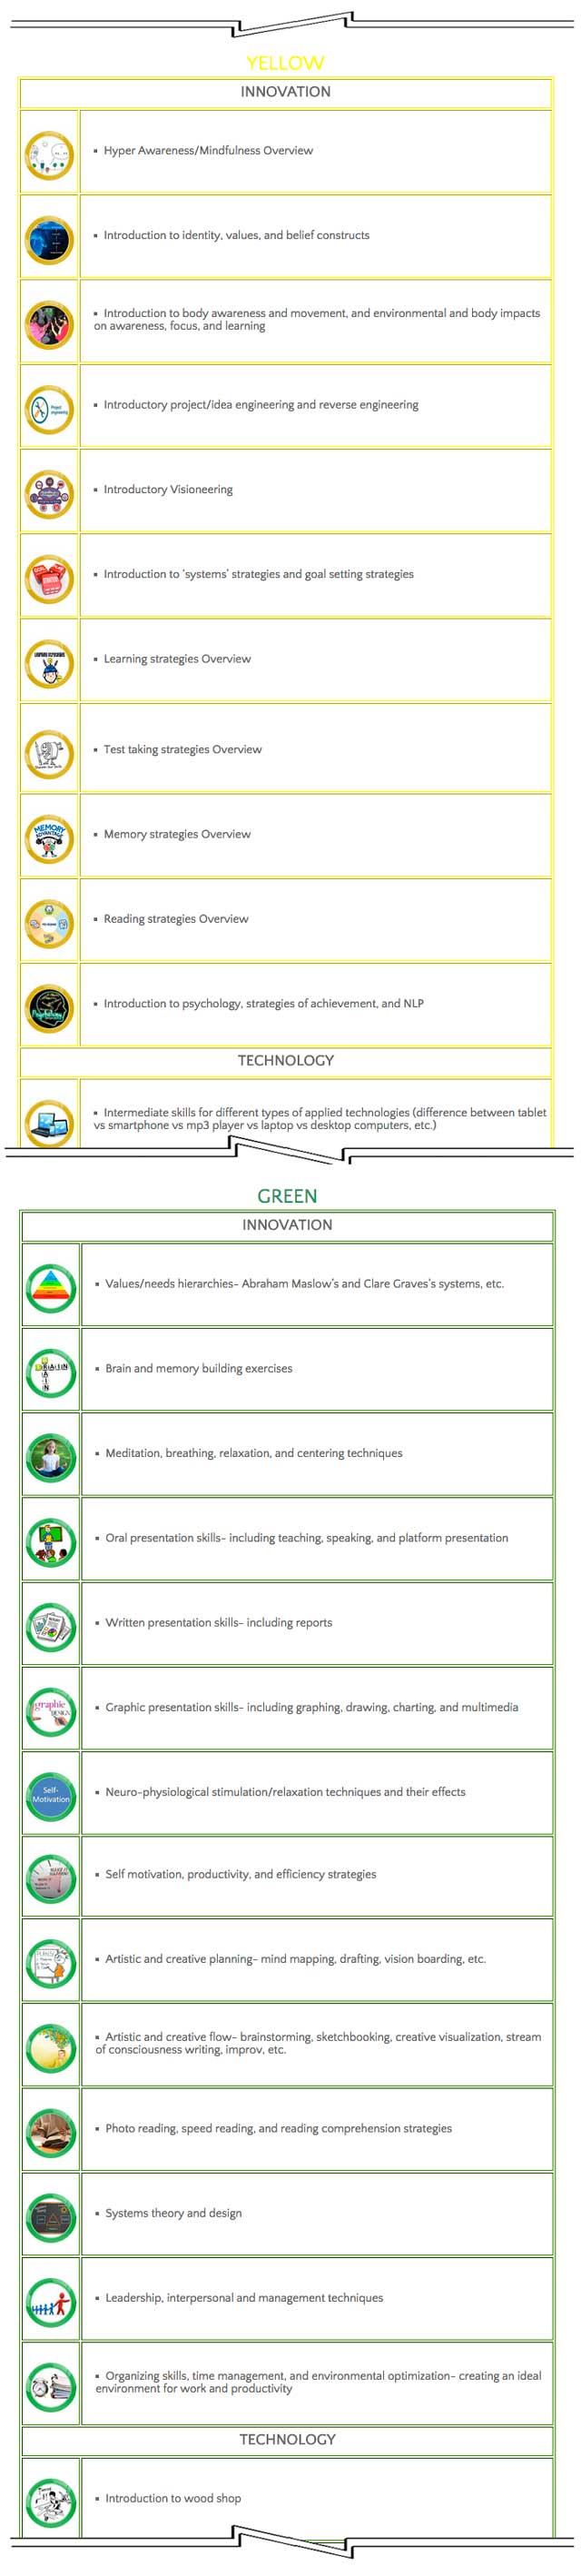 Yellow and Green section of Technology and Innovation Lesson Plan, One Community